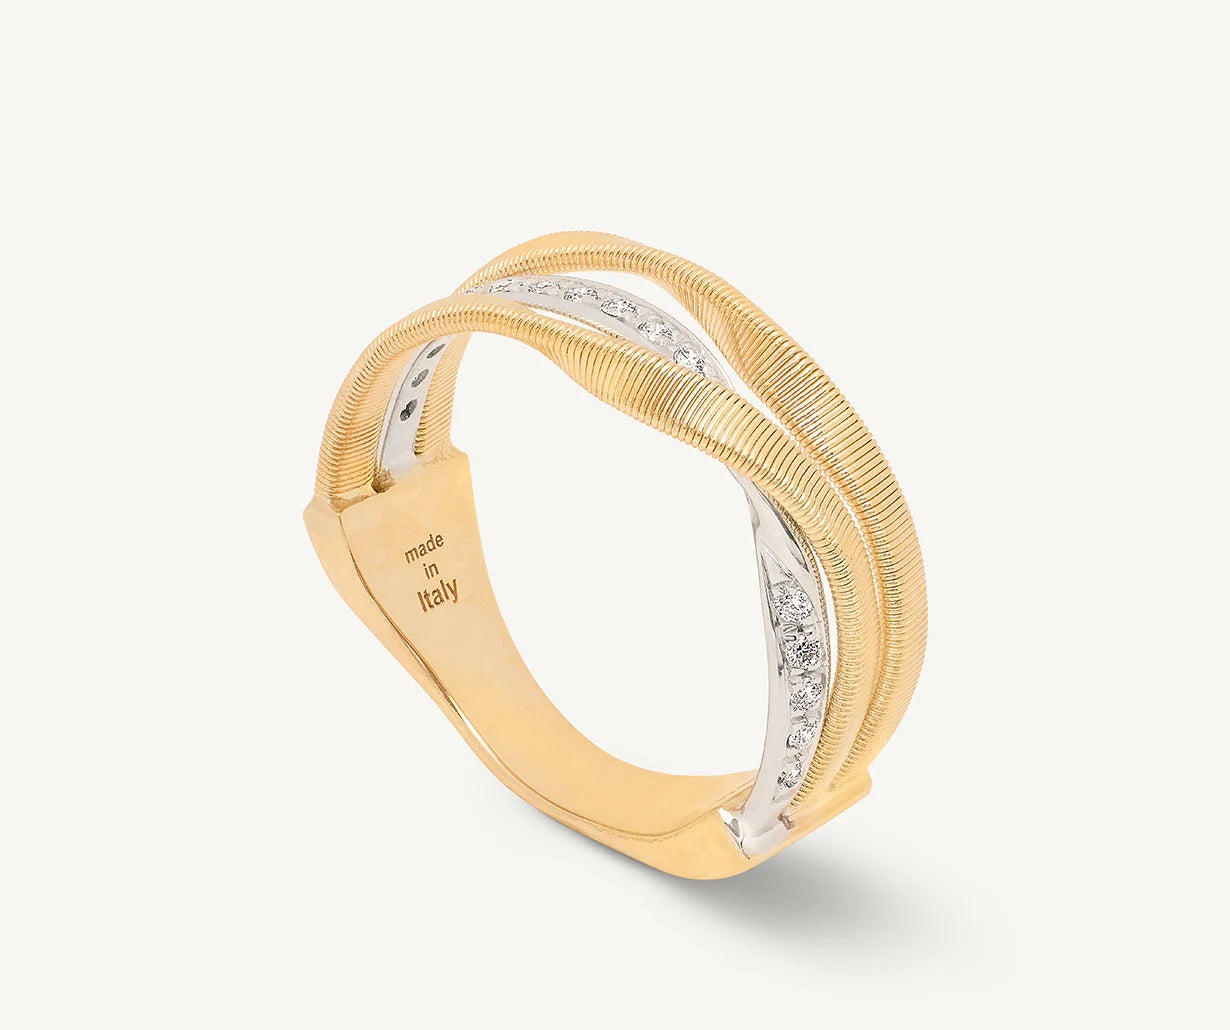 18K YELLOW GOLD 3-BAND COIL RING WITH DIAMONDS FROM THE MARRAKECH COLLECTION